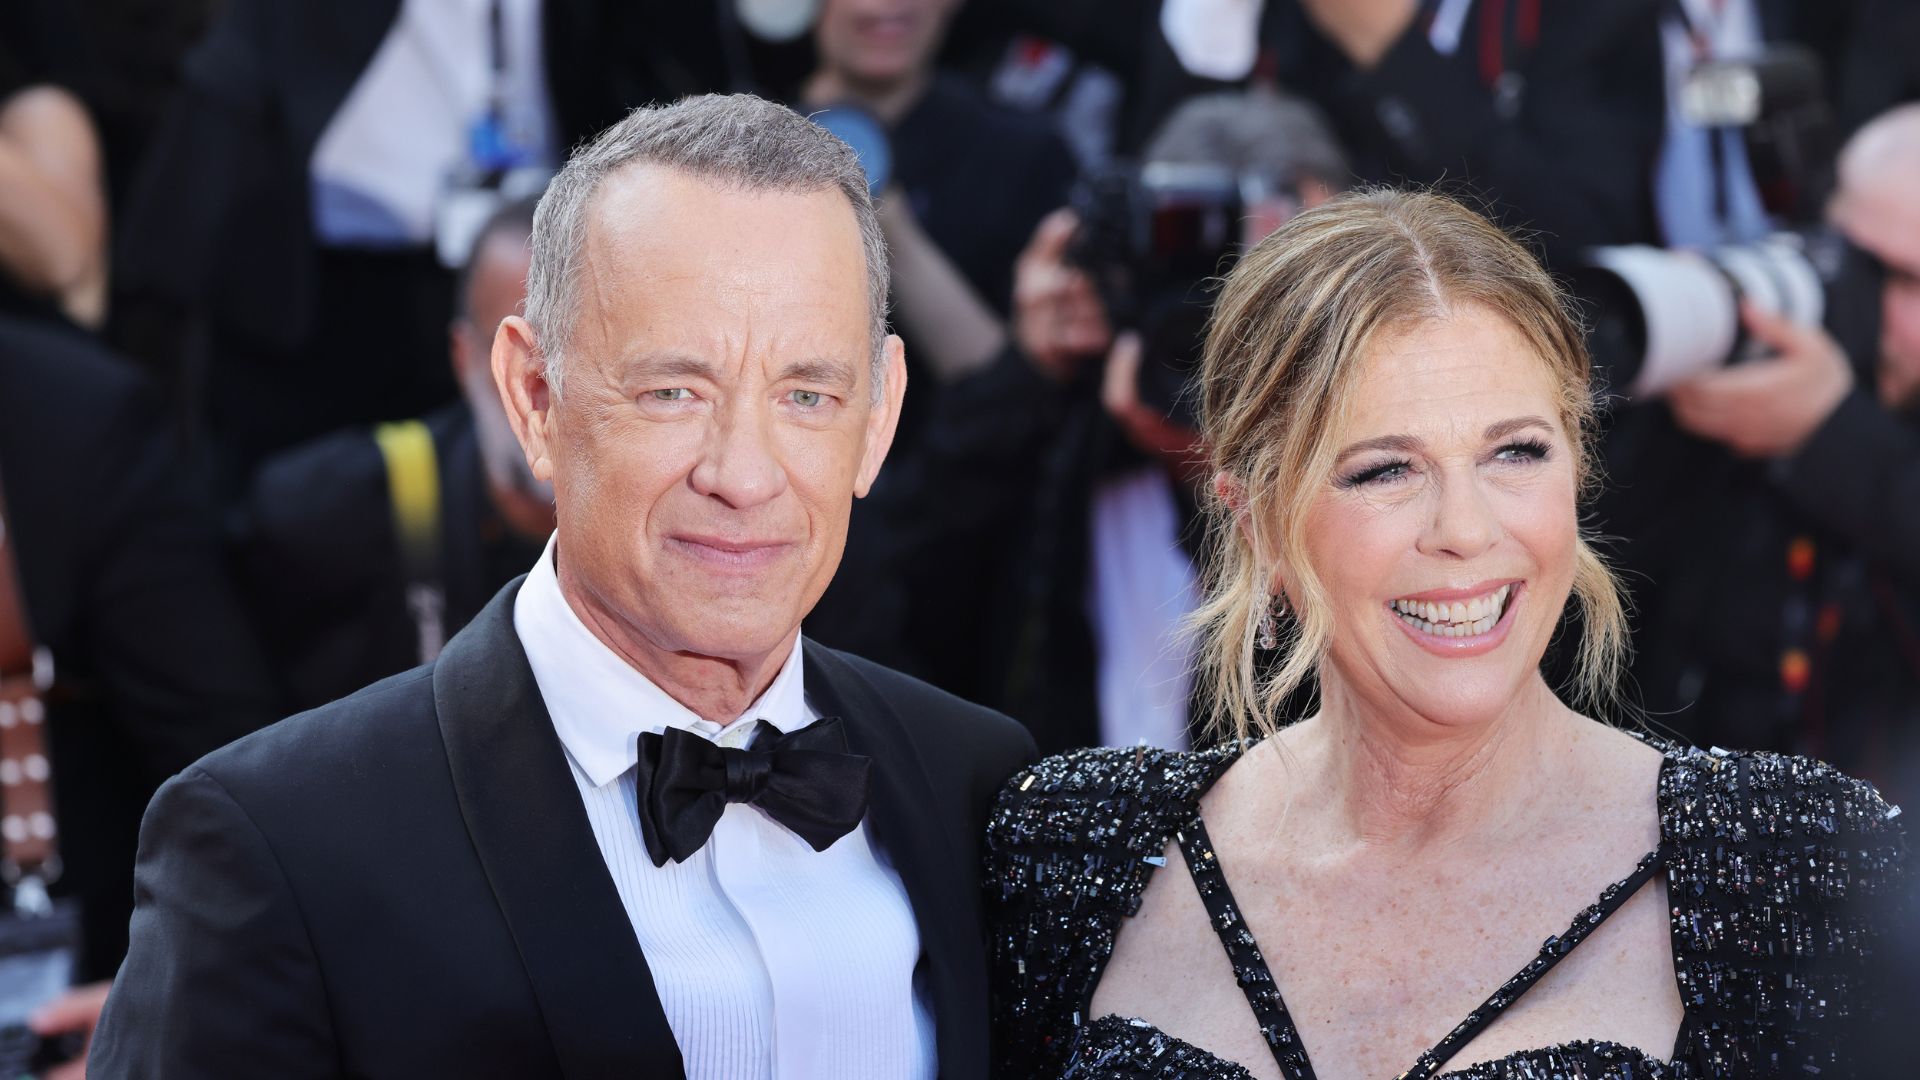 What really happened in photo of Tom Hanks and Rita Wilson at Cannes ...